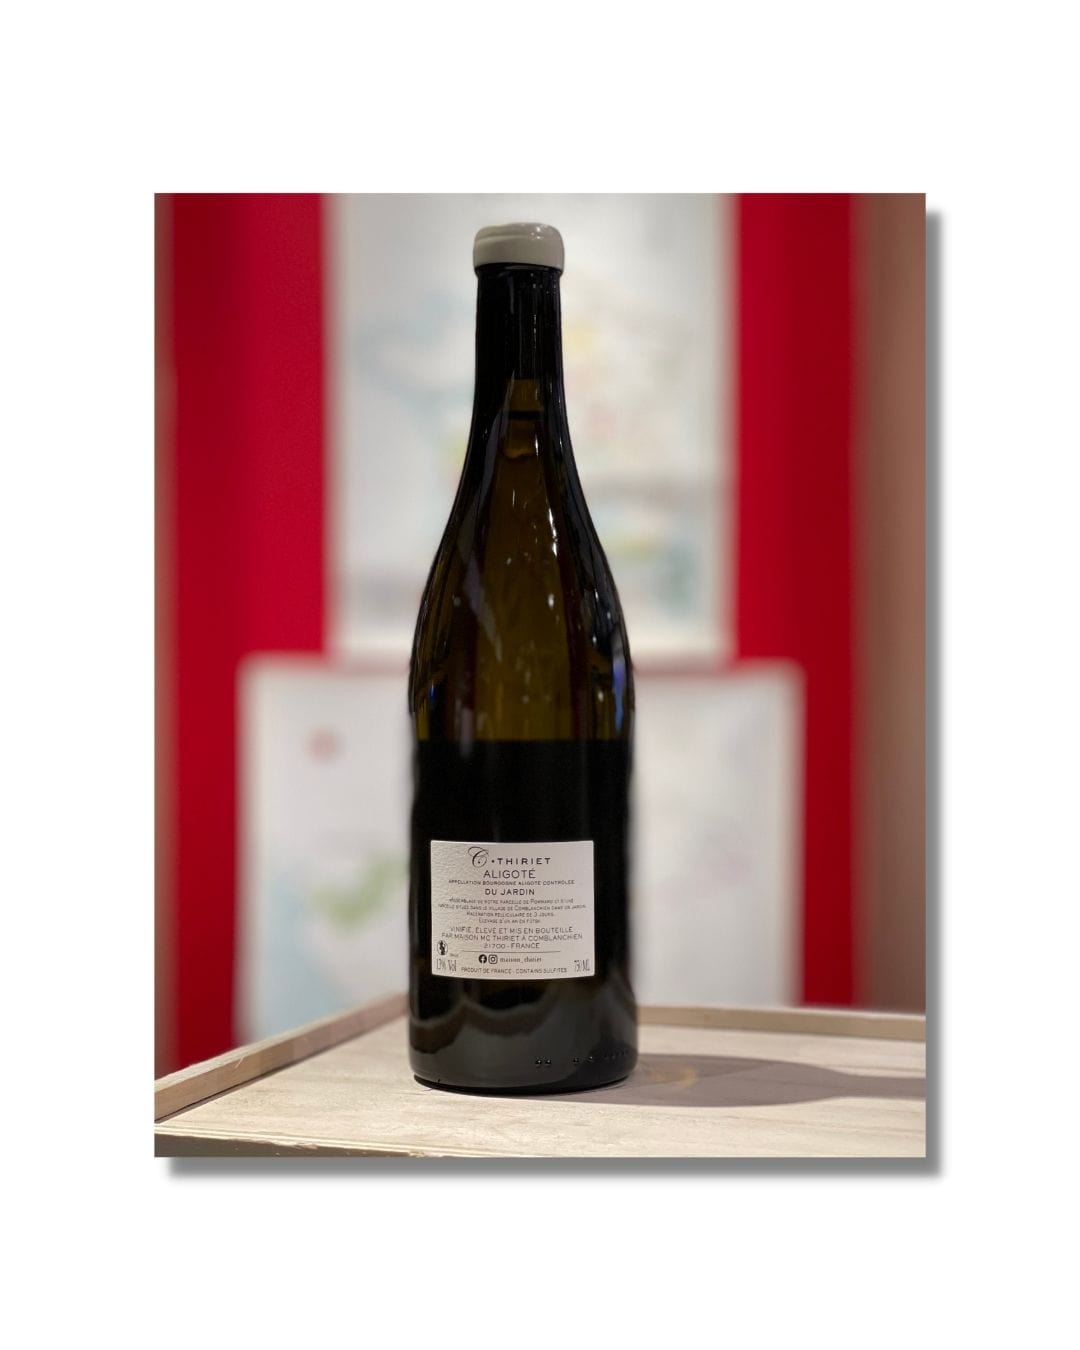 Shop Maison Thiriet Maison Thiriet Bourgogne Aligote du Jardin 2020 online at PENTICTON artisanal French wine store in Hong Kong. Discover other French wines, promotions, workshops and featured offers at pentictonpacific.com 